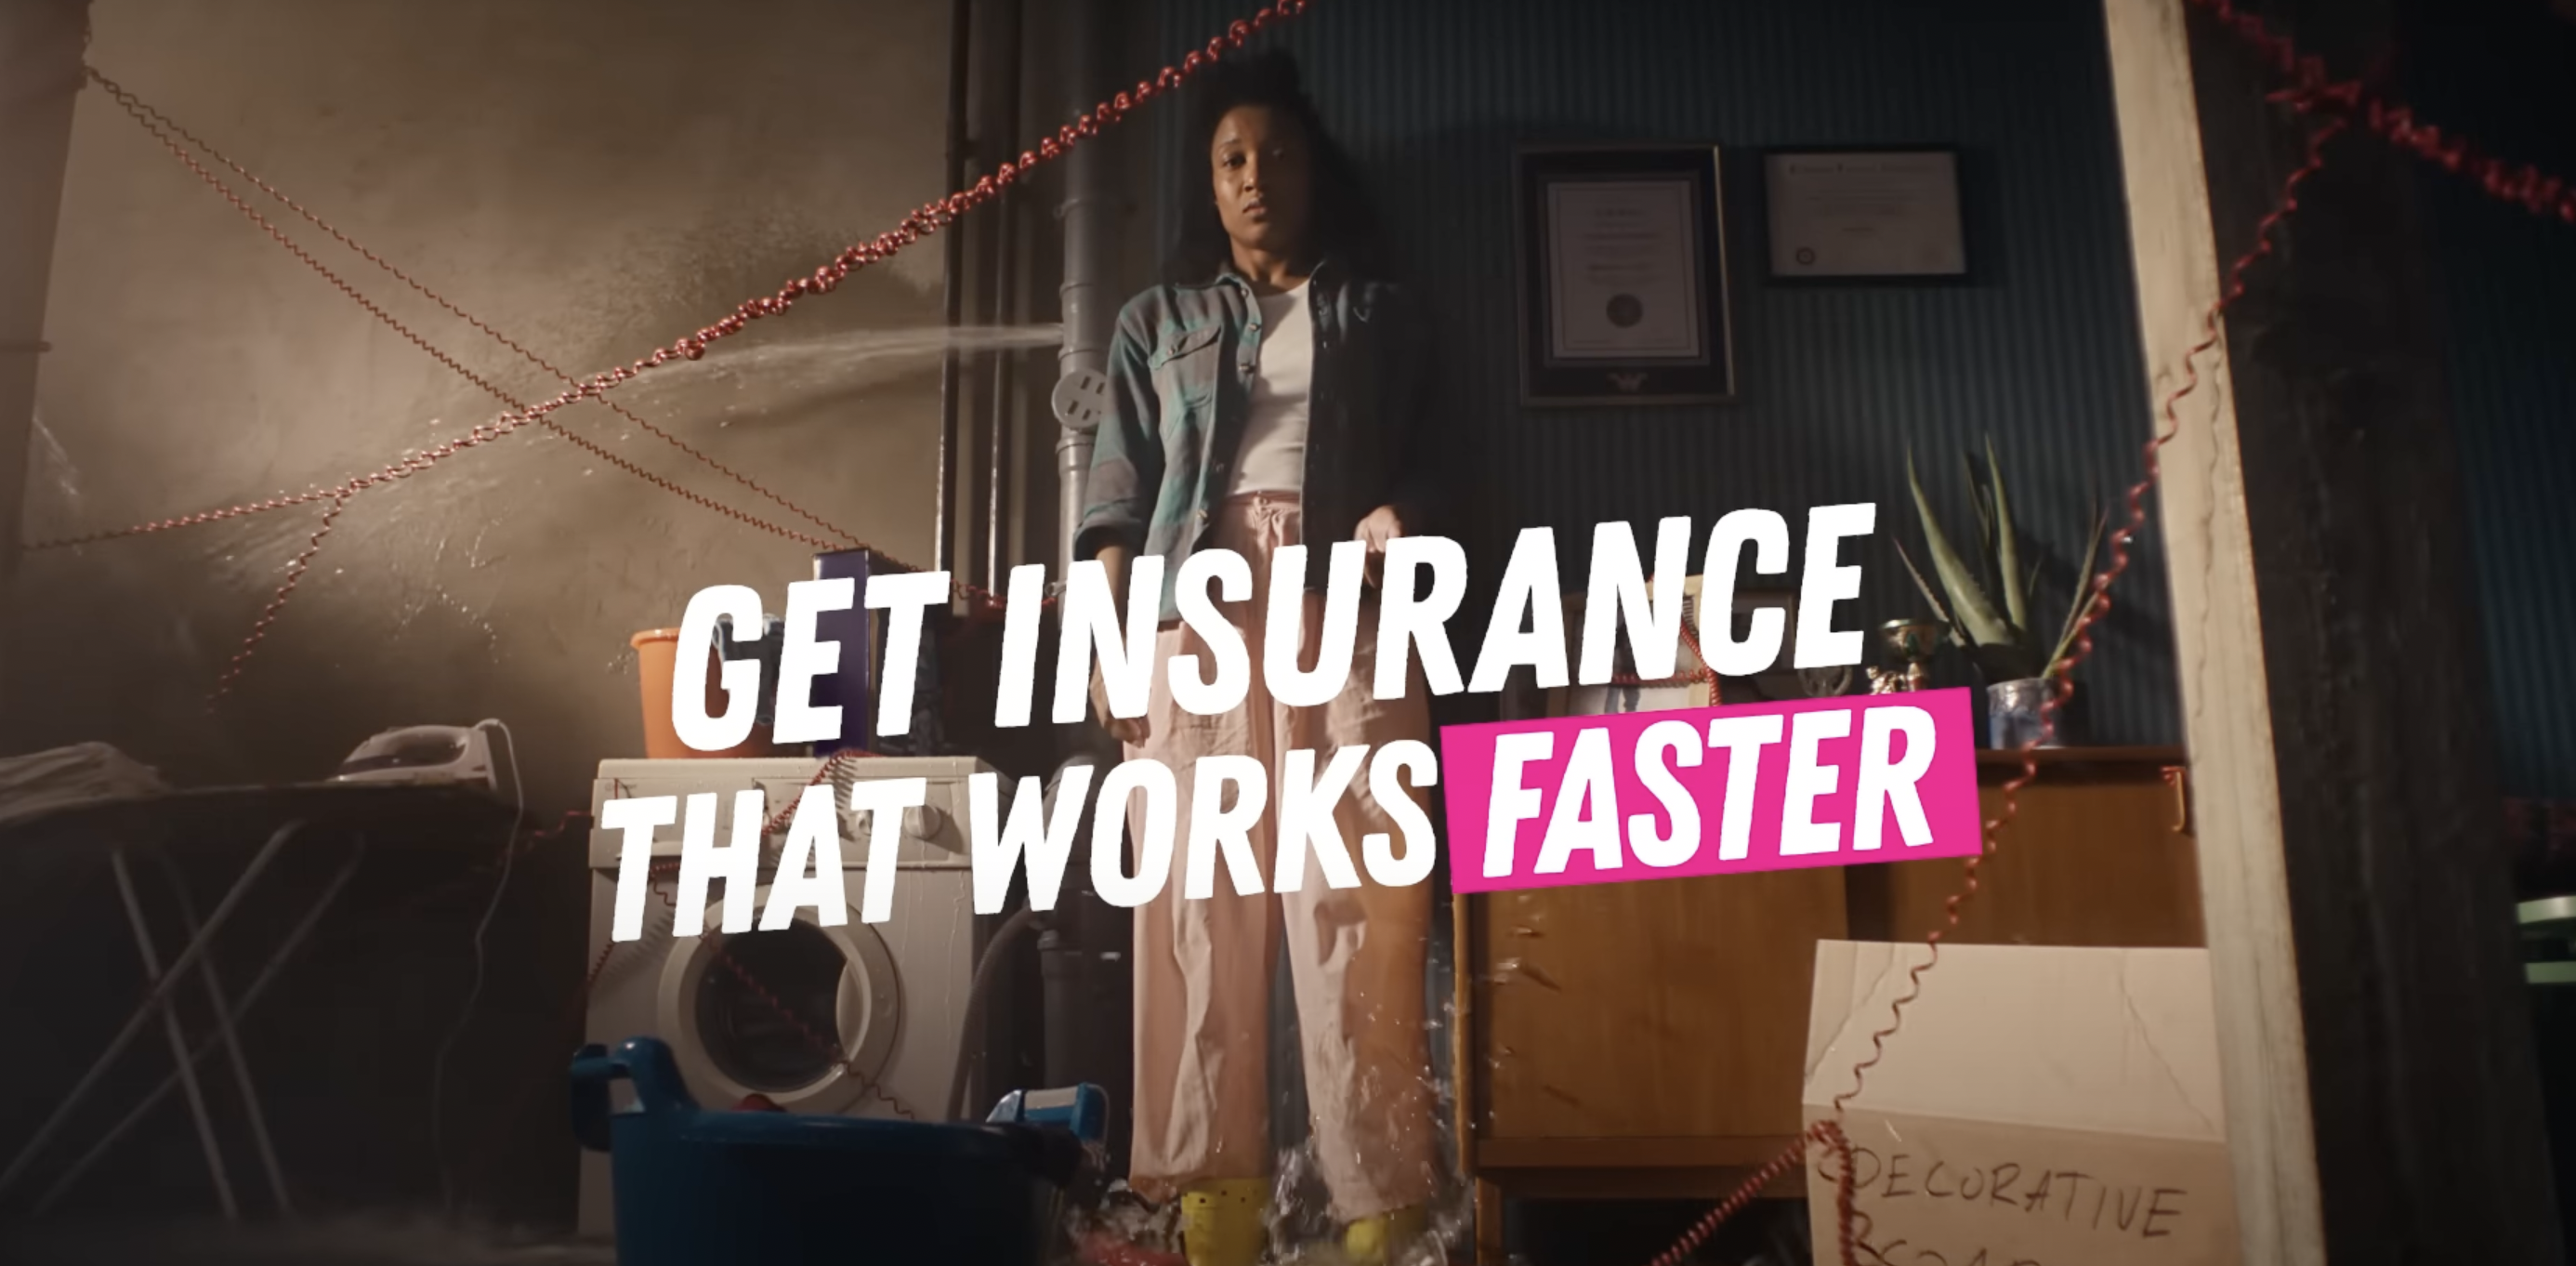 Lemonade Draws Attention to Insurance Issues with Its Entertaining Campaign